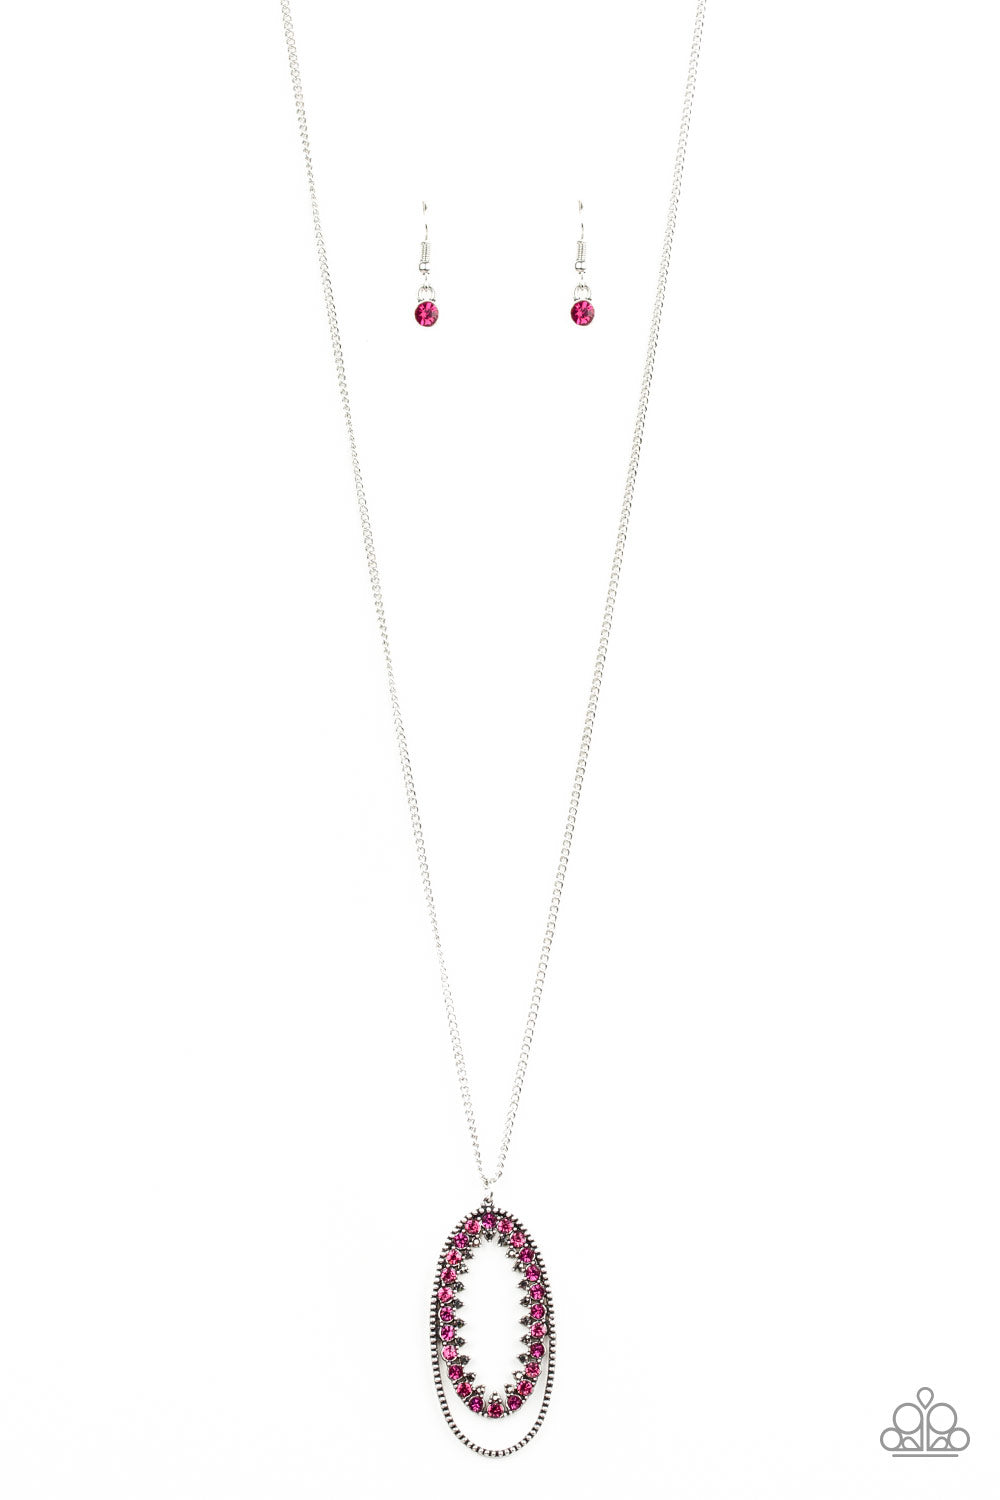 five-dollar-jewelry-money-mood-pink-necklace-paparazzi-accessories